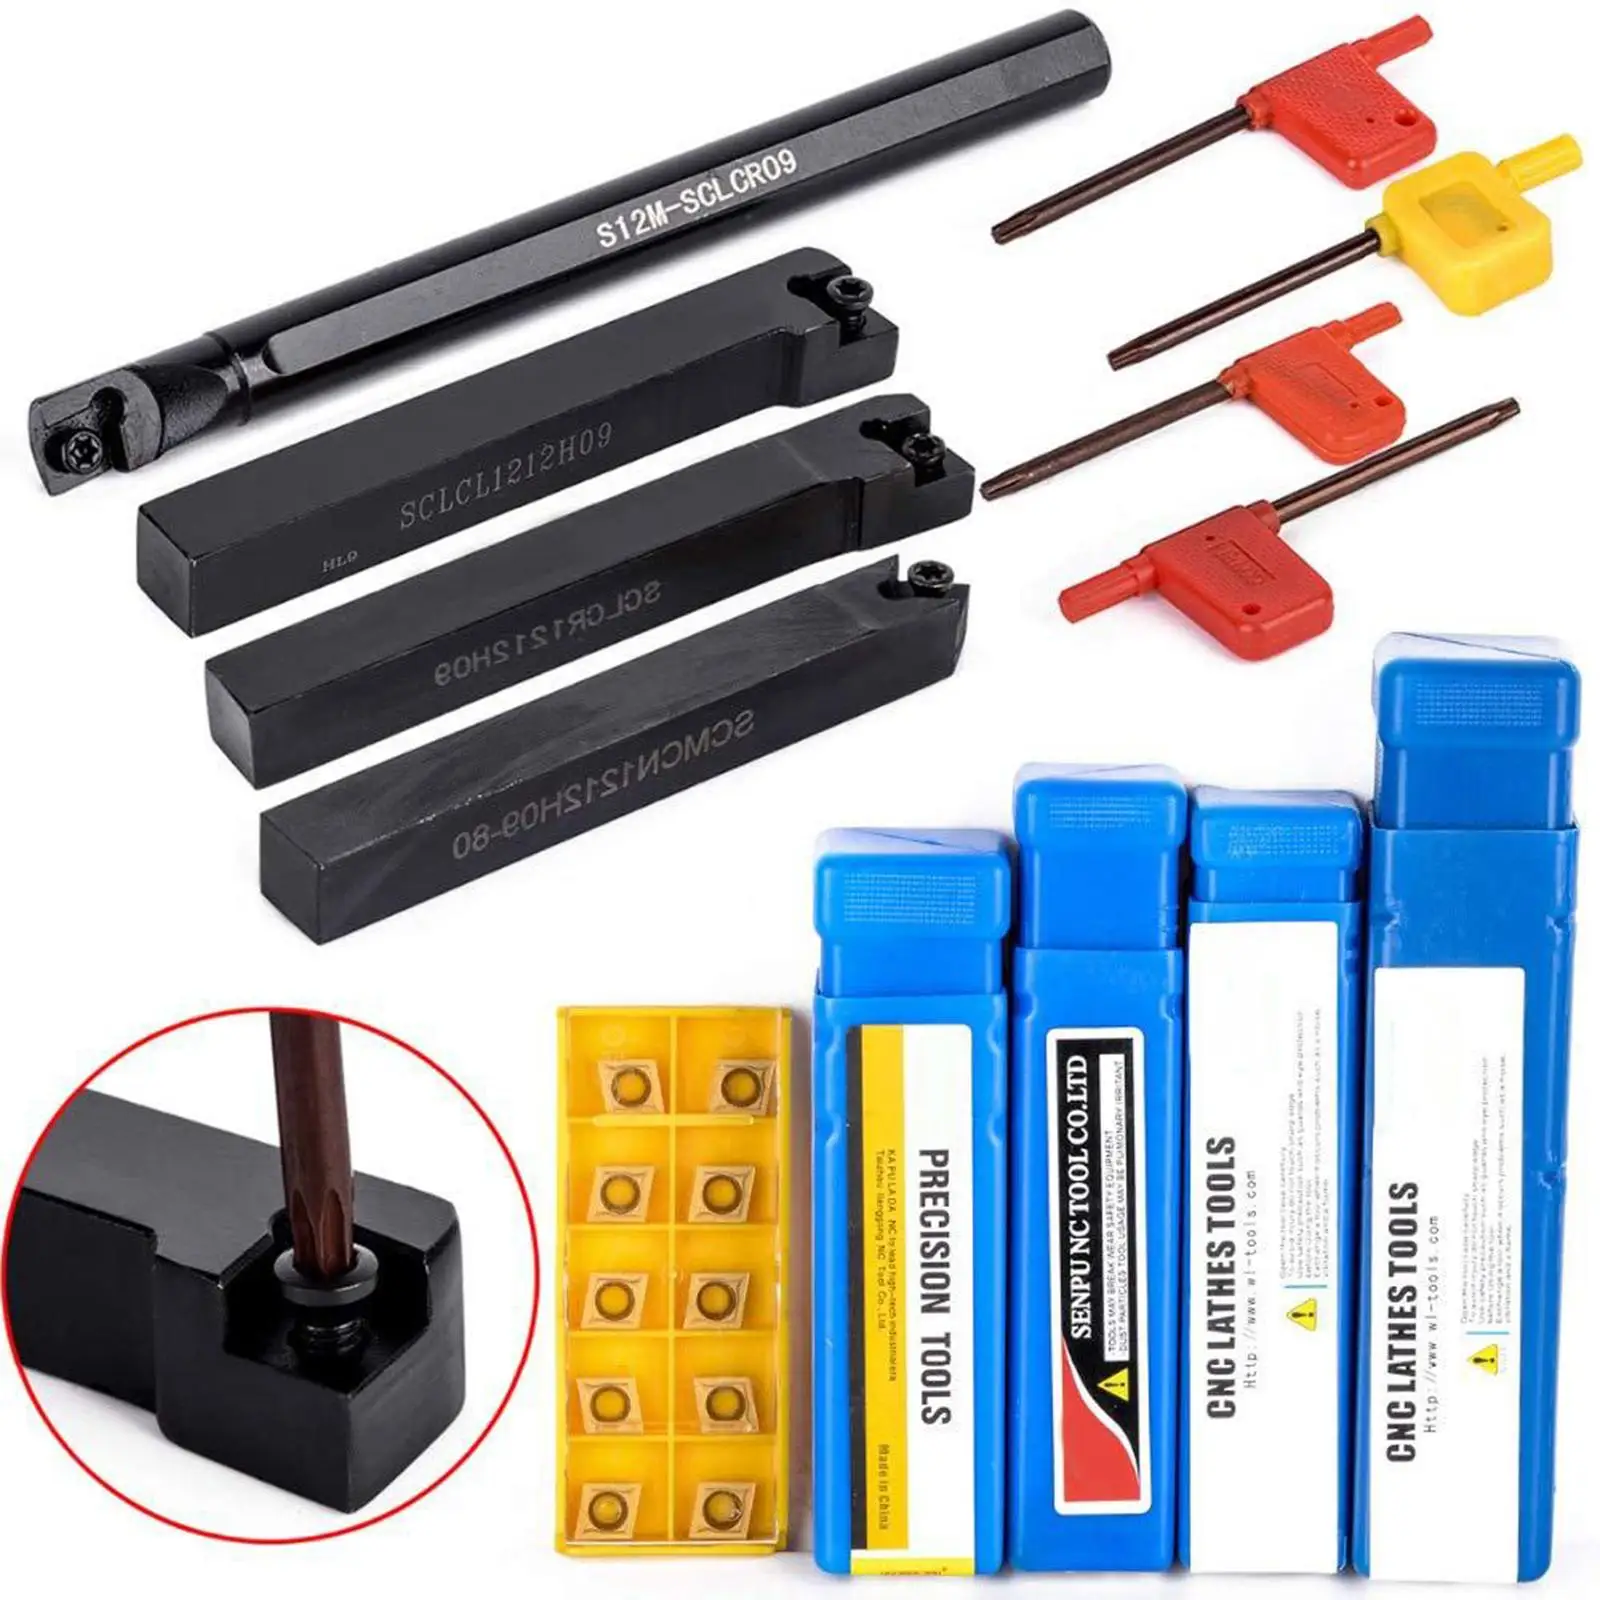 4 Pieces Lathe Boring Bar and 10Pcs Carbide Inserts Replacement Parts with 4Pcs Wrench Metal Turning Tools Holder Sclcr1212H09